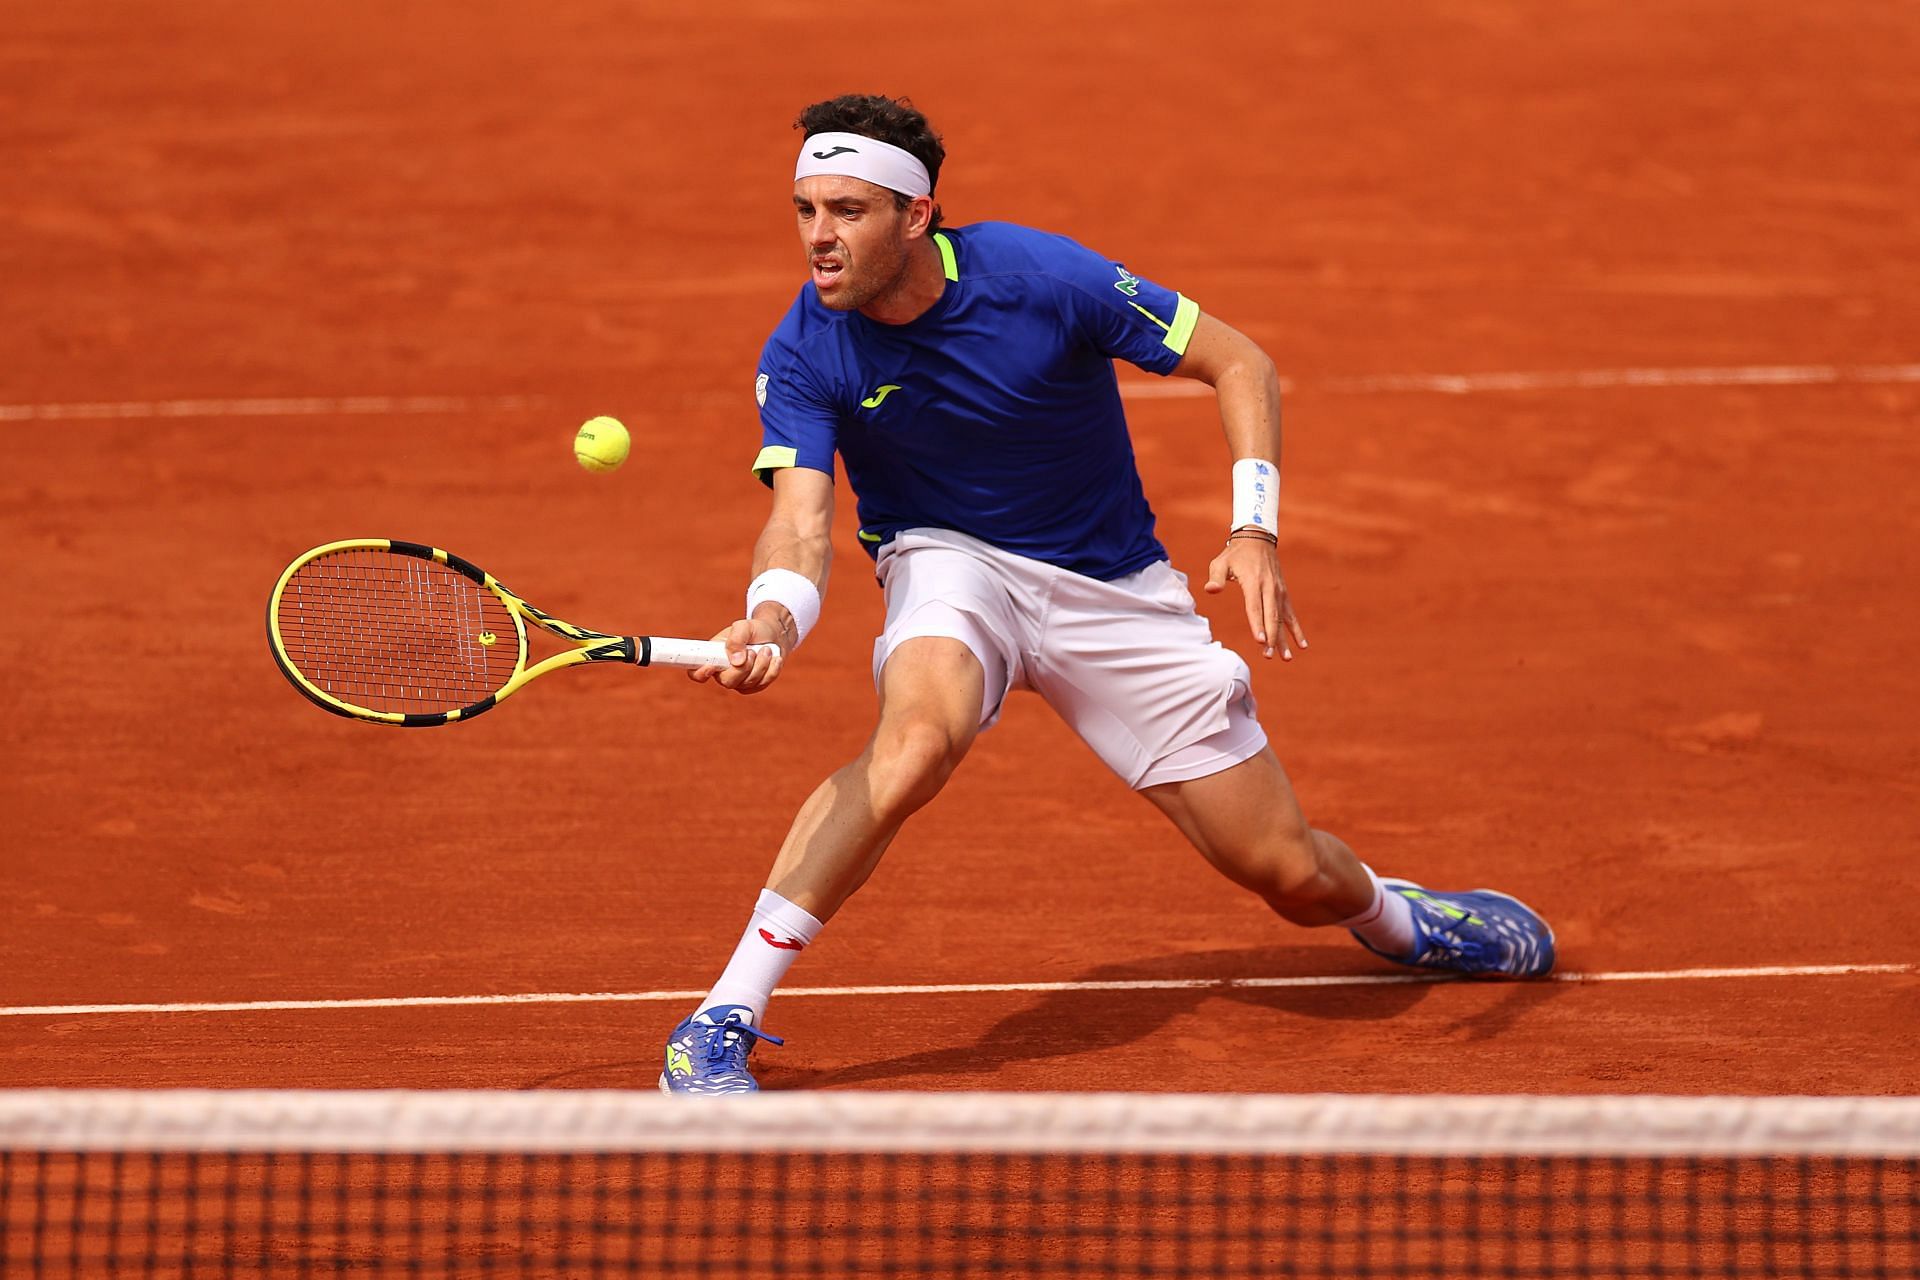 Cecchinato might have a slight edge over his fellow Italian, having won a title in Umag in 2018